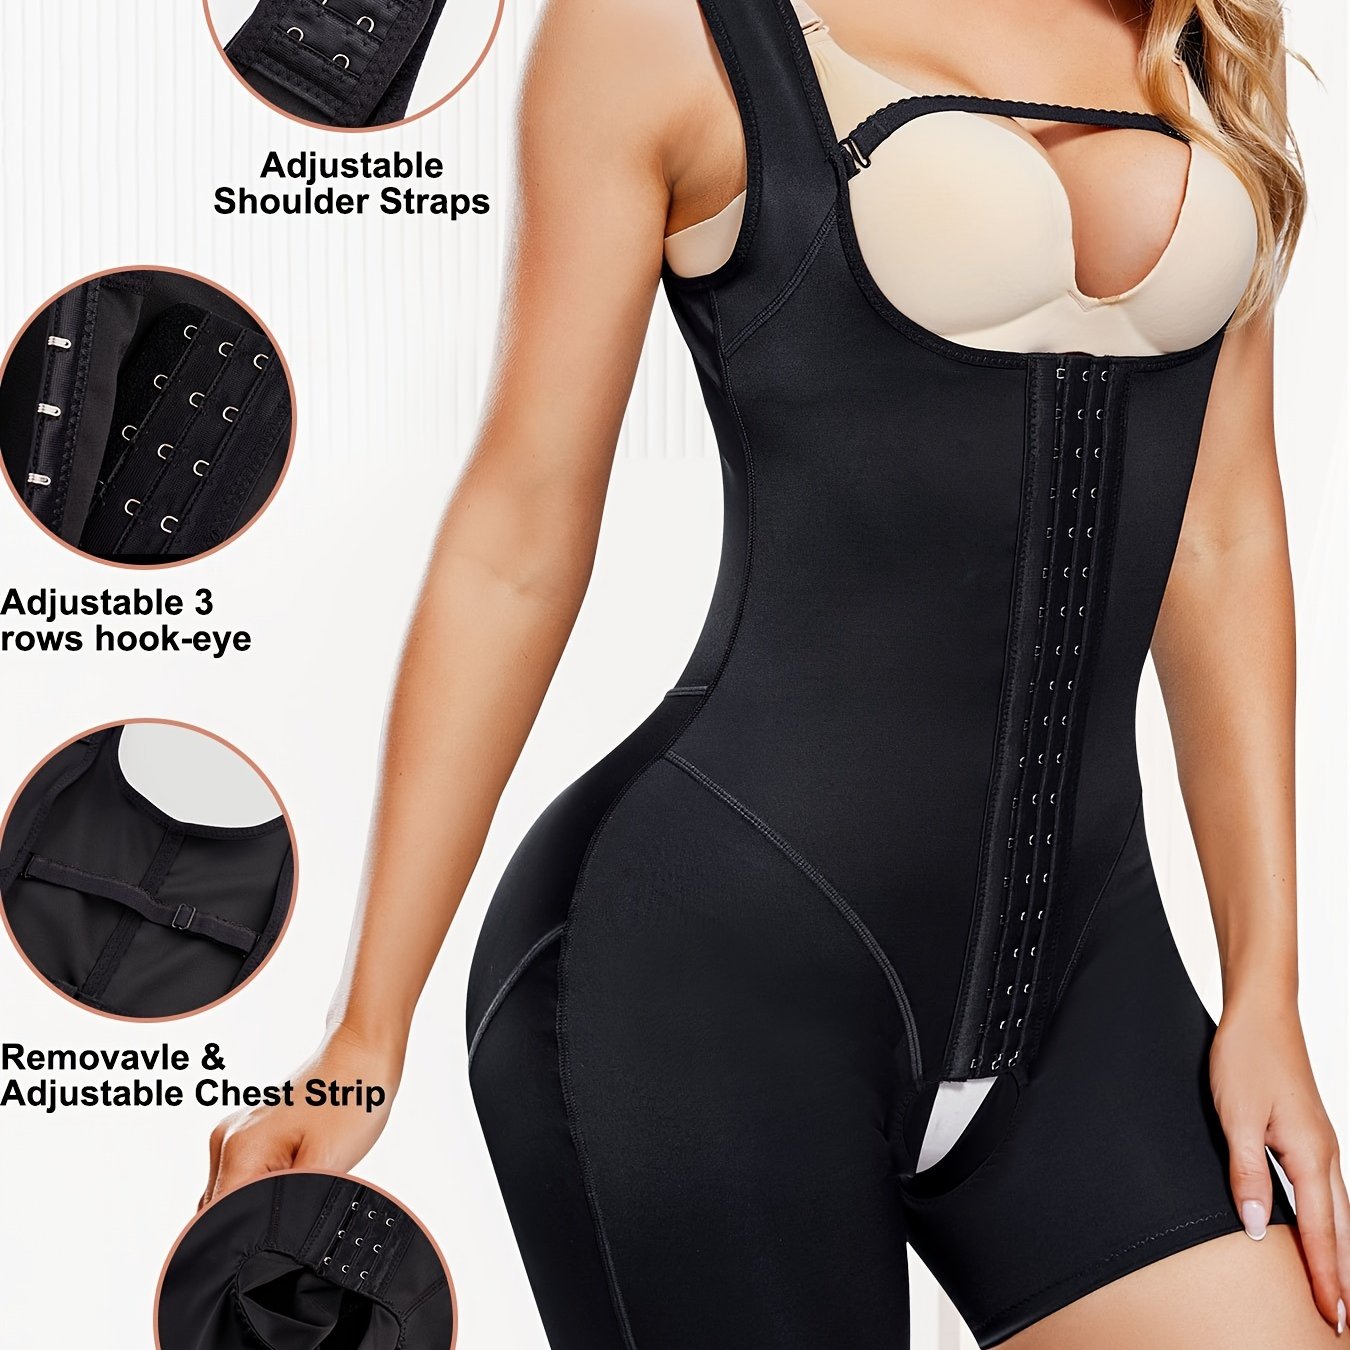 Dropship Body Shaper Women Waist Trainer Butt Lifter Slimming Binders  Bodysuit Sheath Corset Panties Shapewear to Sell Online at a Lower Price